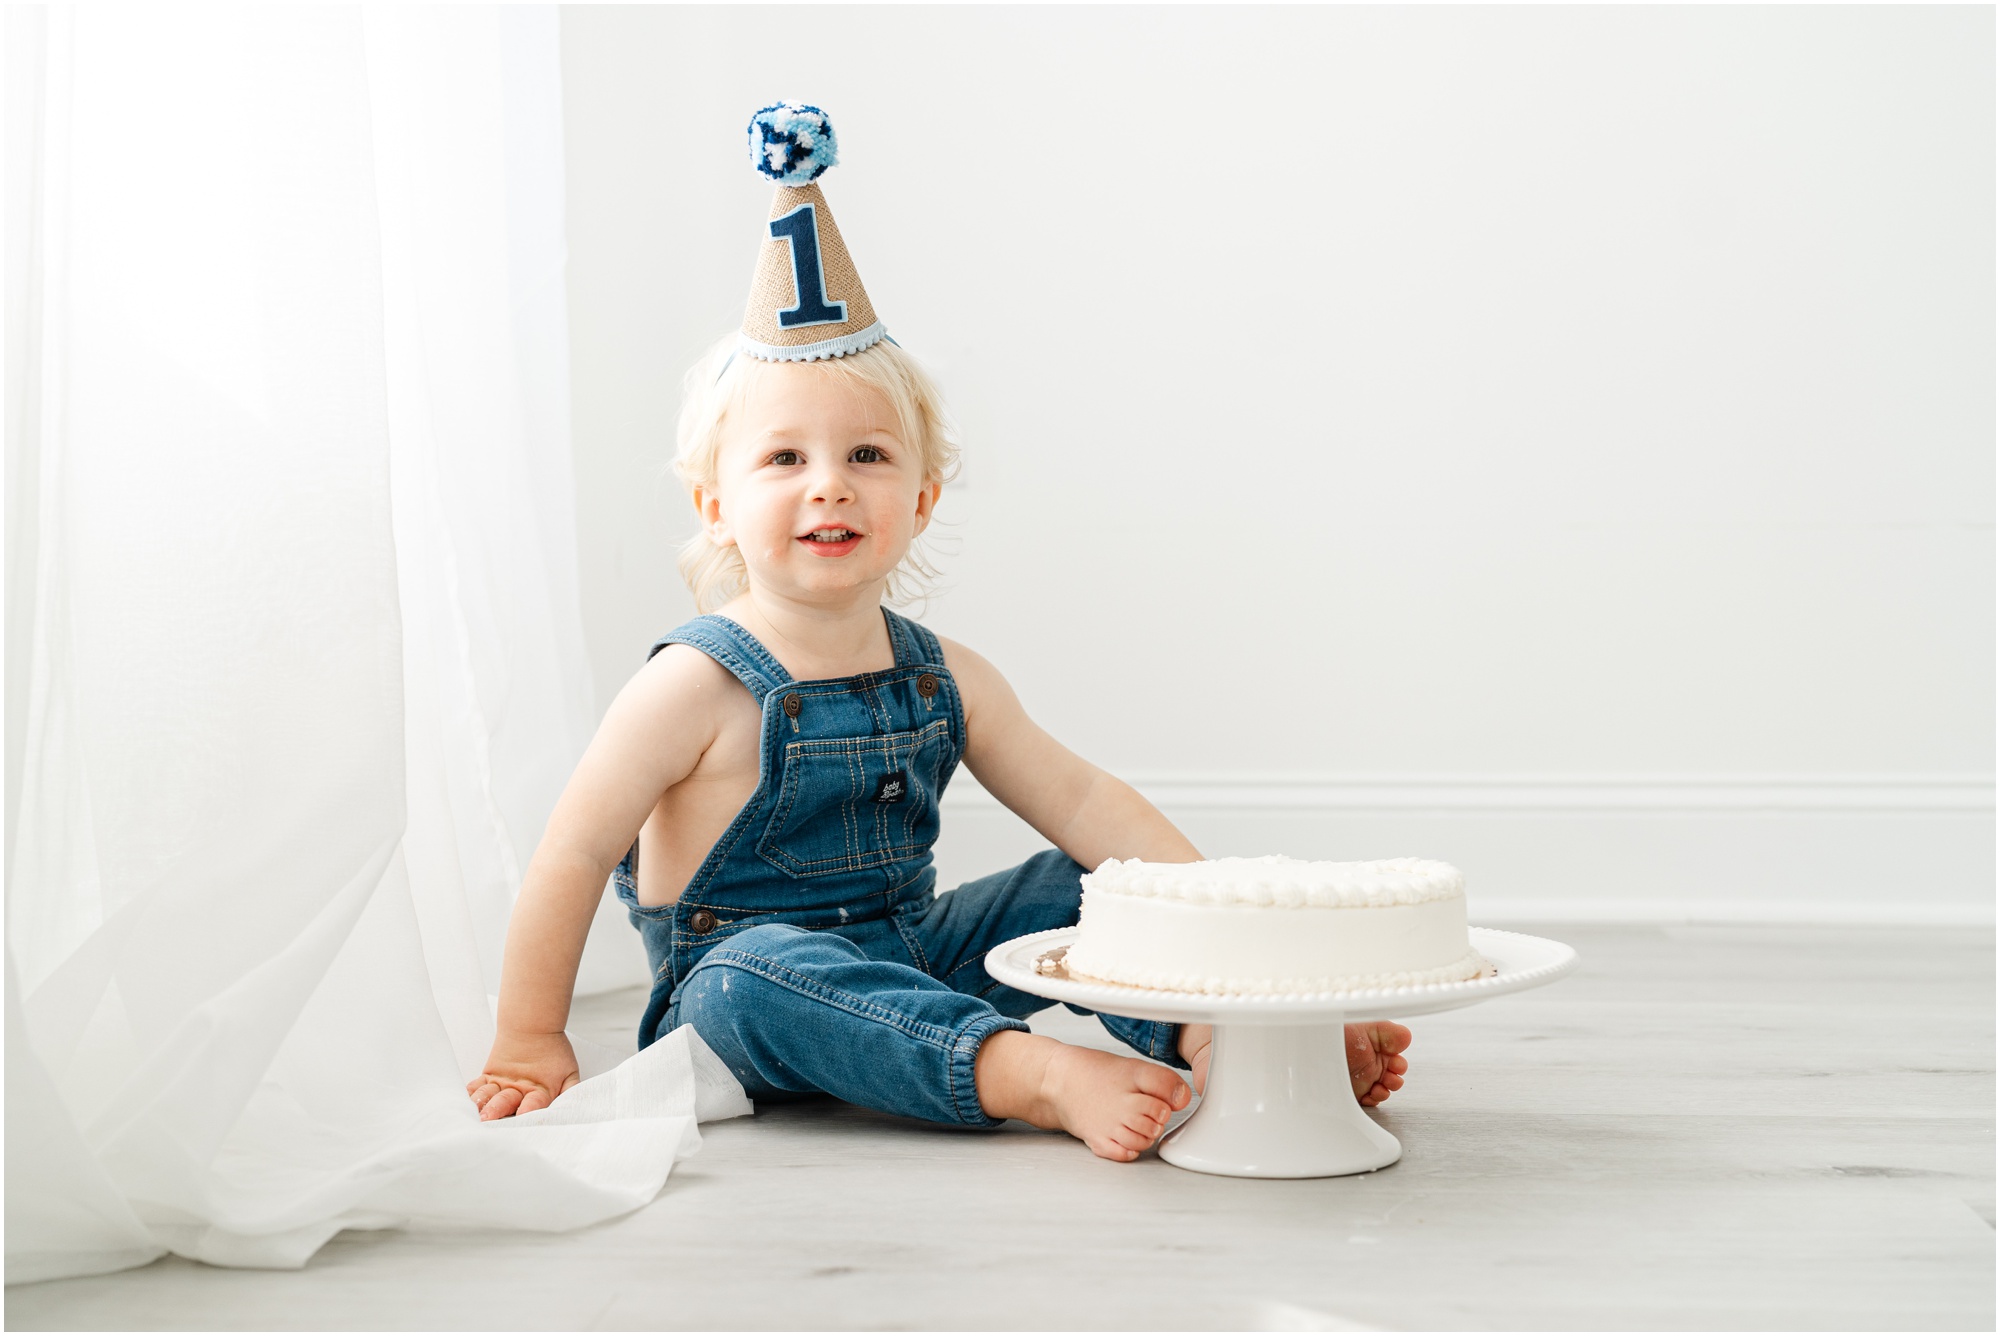 A young boy sits on the floor with a cake and a birthday hat on his head for his first birthday photo session.